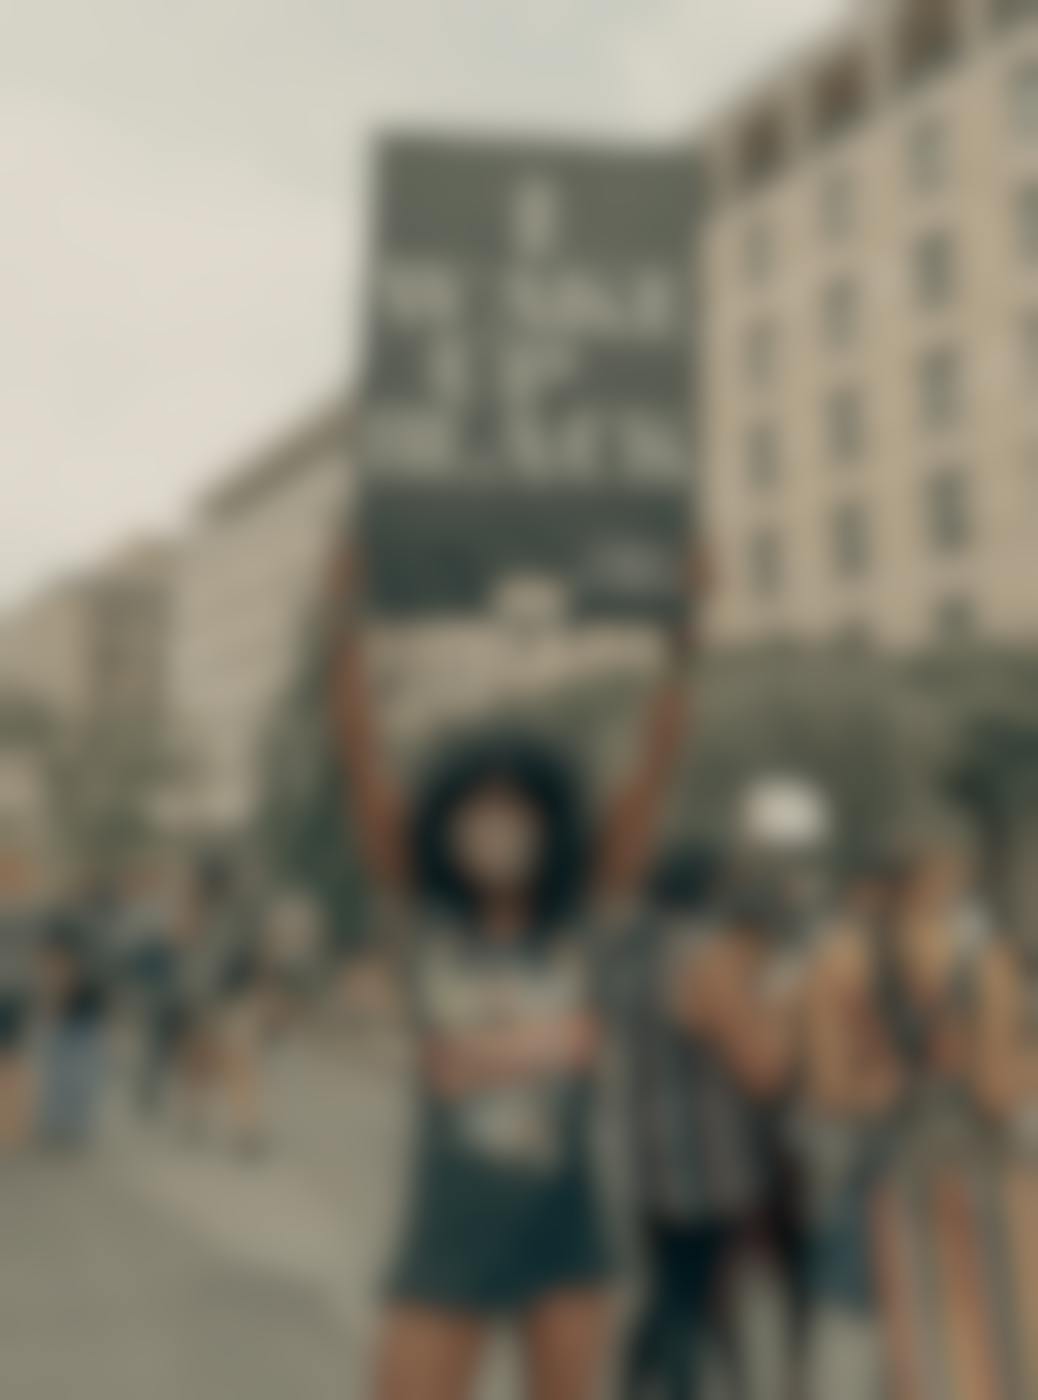 A young black woman at a protest holdning a sign t at reads, I Wake Up Black